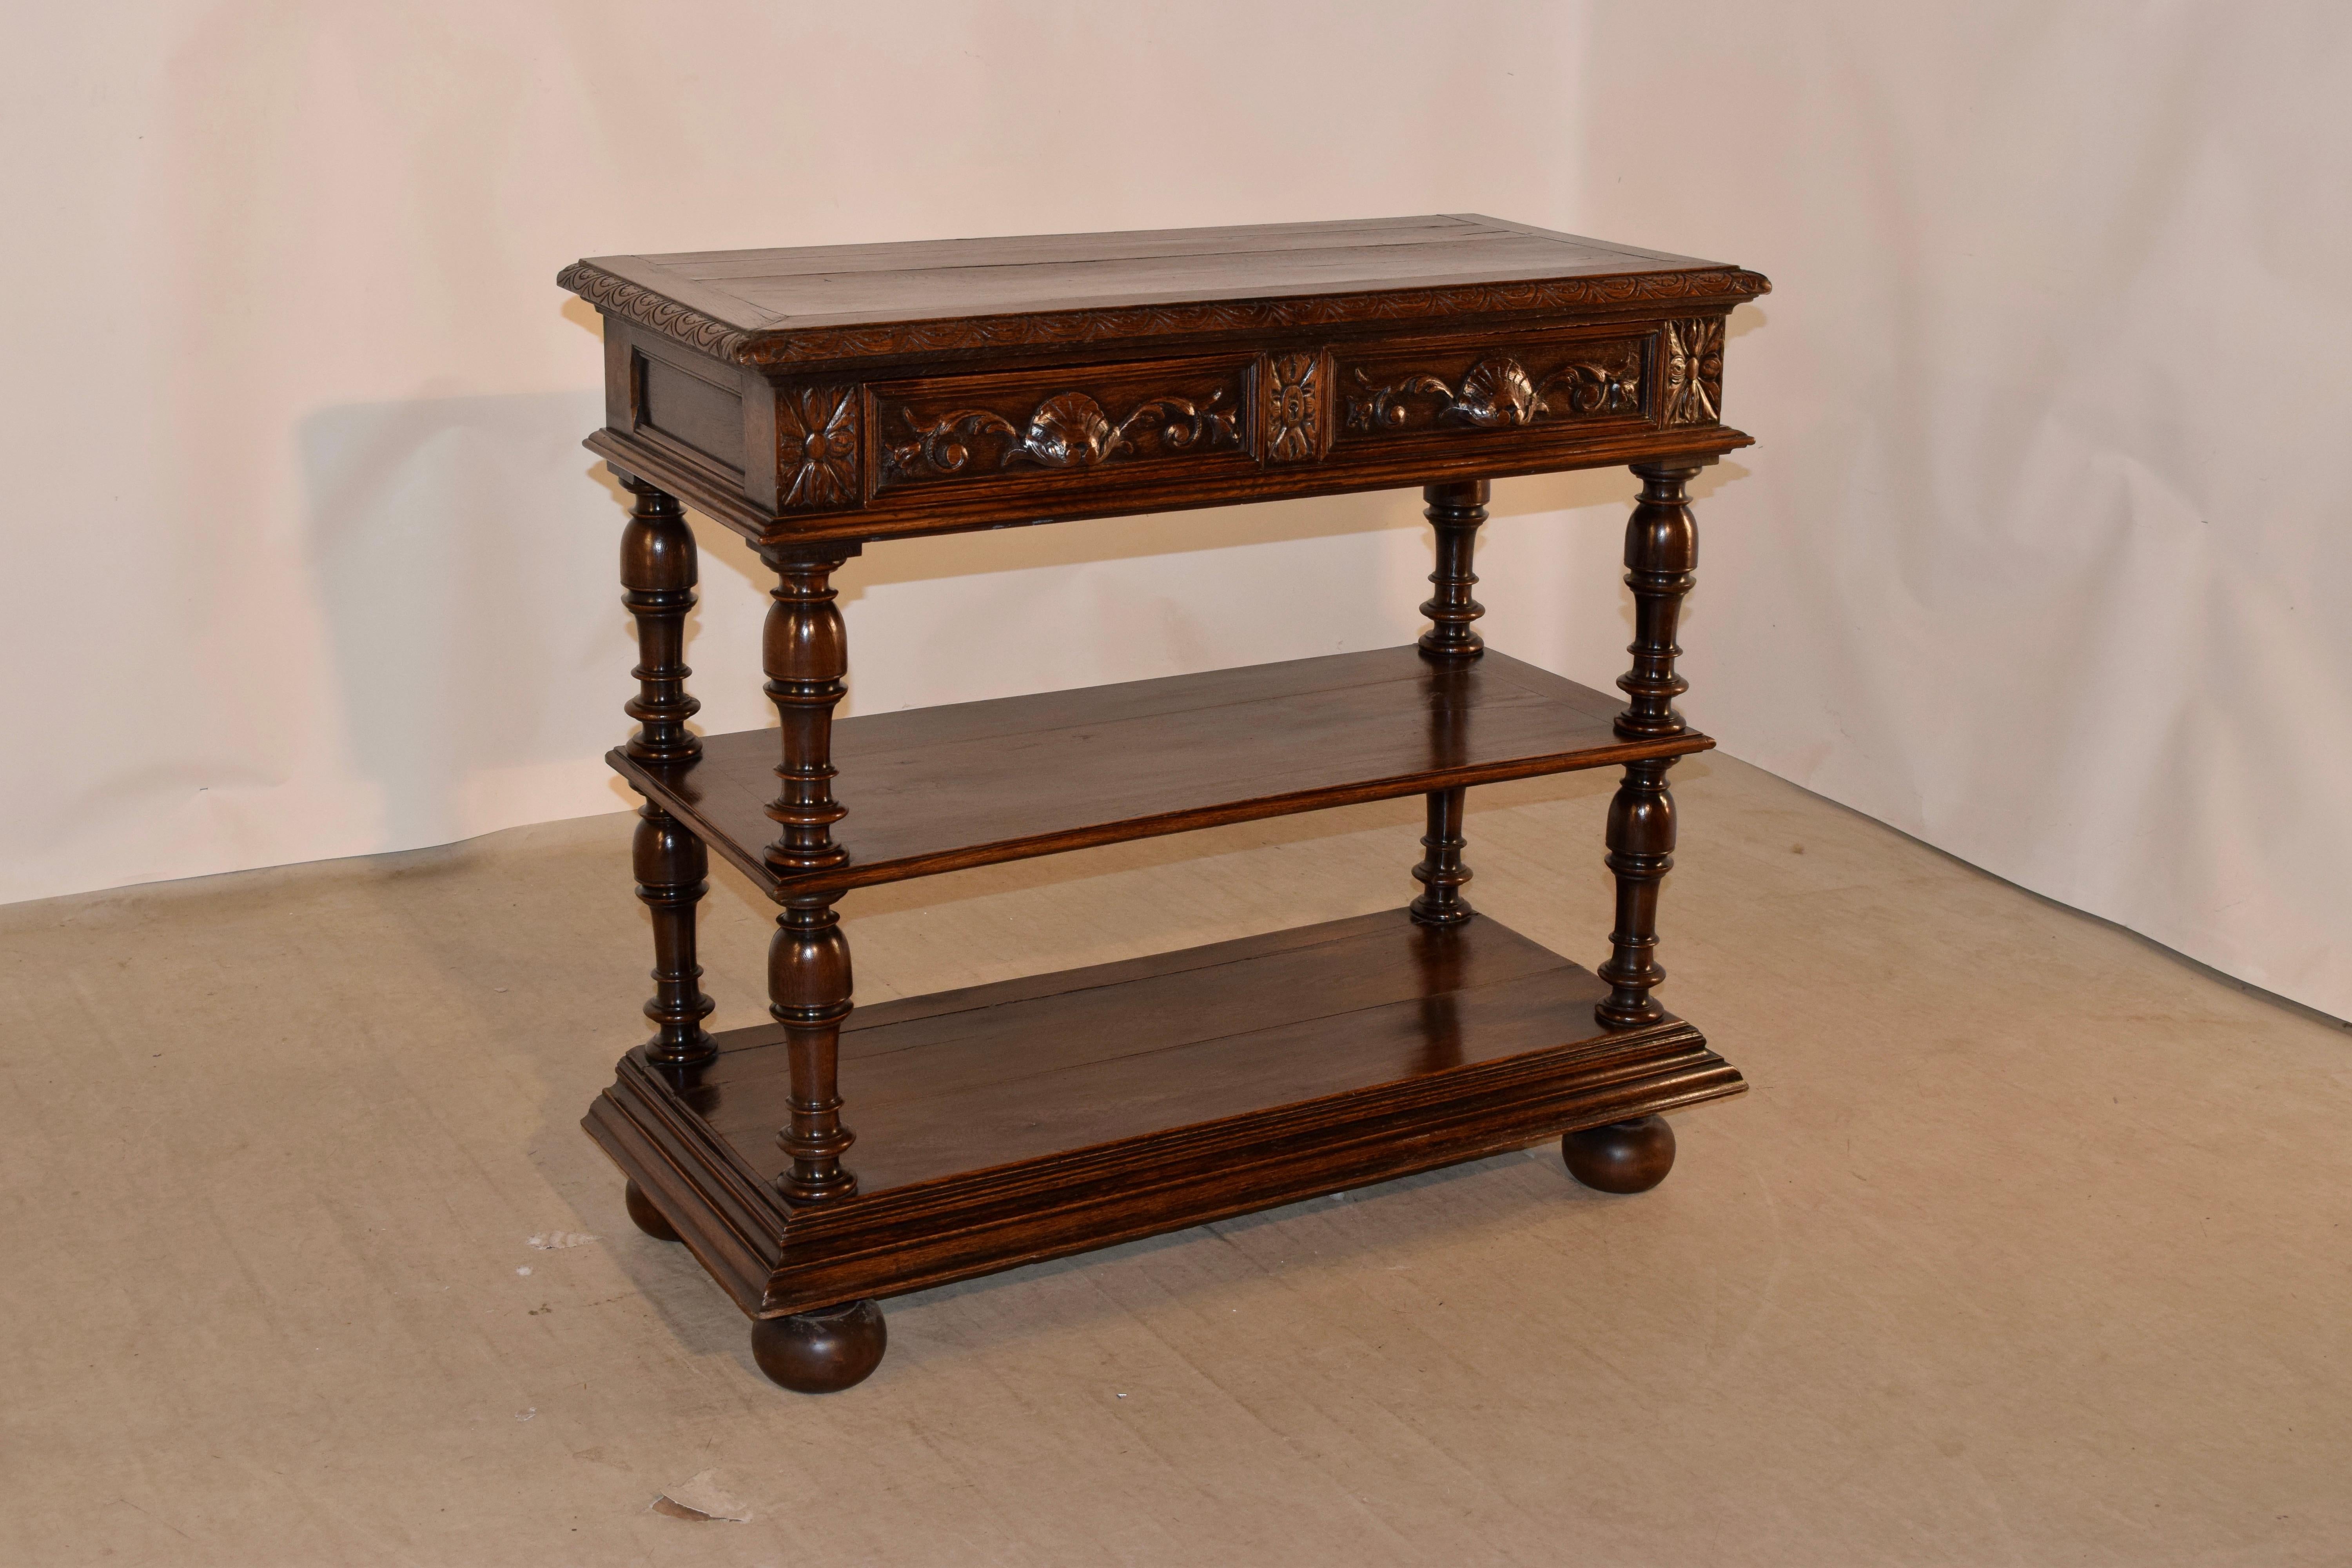 19th century French dessert buffet made from oak. The top is banded and has old repairs from shrinkage. The apron is paneled on the sides and contains two front drawers, over two shelves, separated by wonderfully turned shelf supports. Resting on